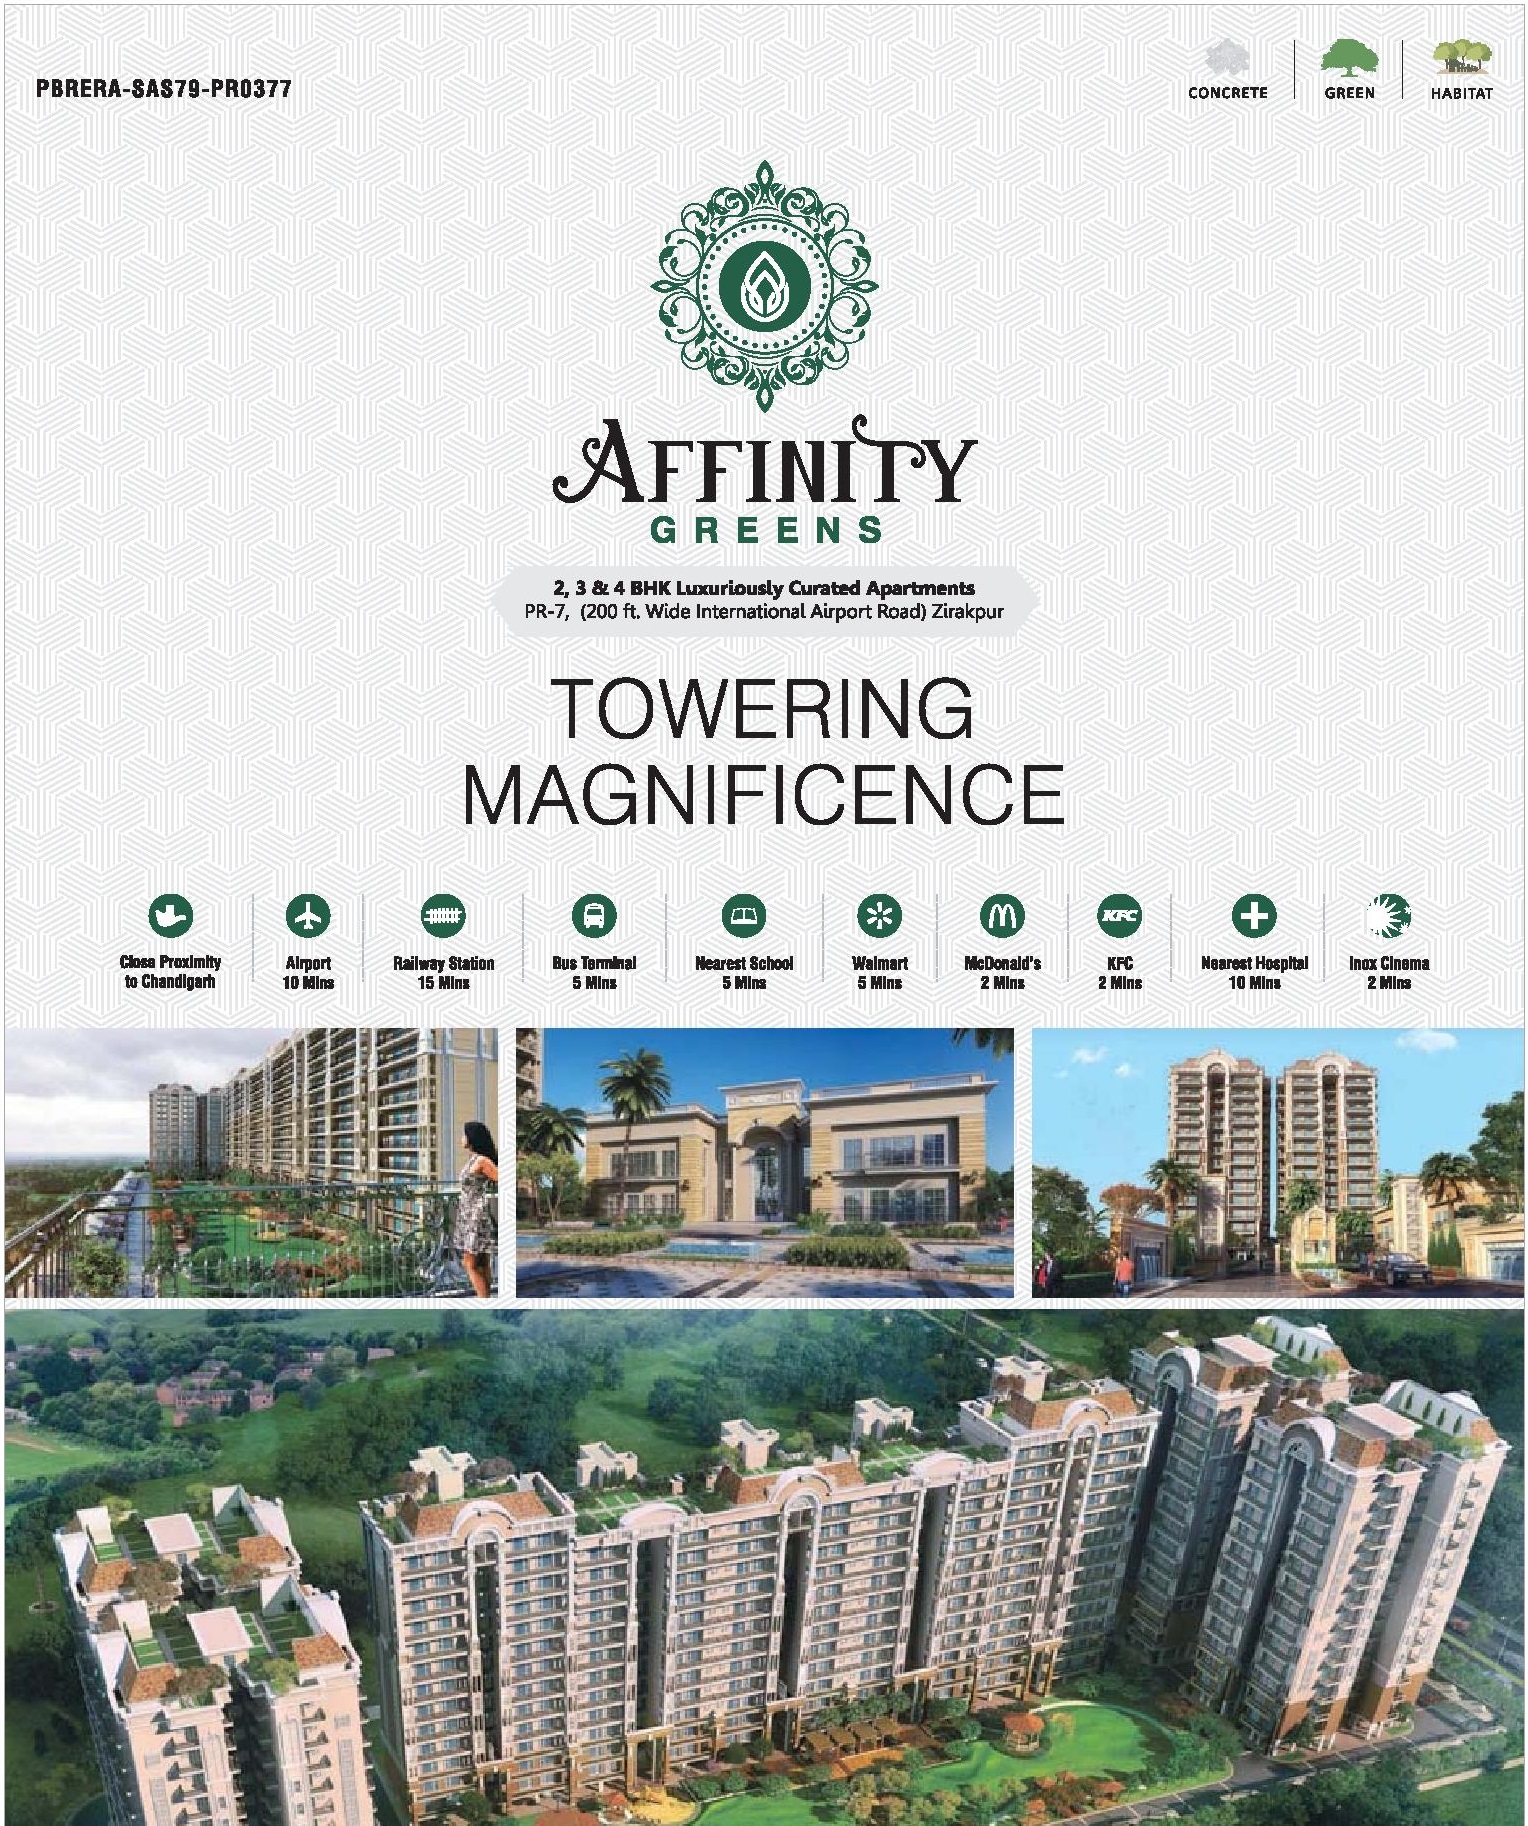 Book 2, 3 & 4 luxurious curated apartments at Affinity Greens in Zirakpur